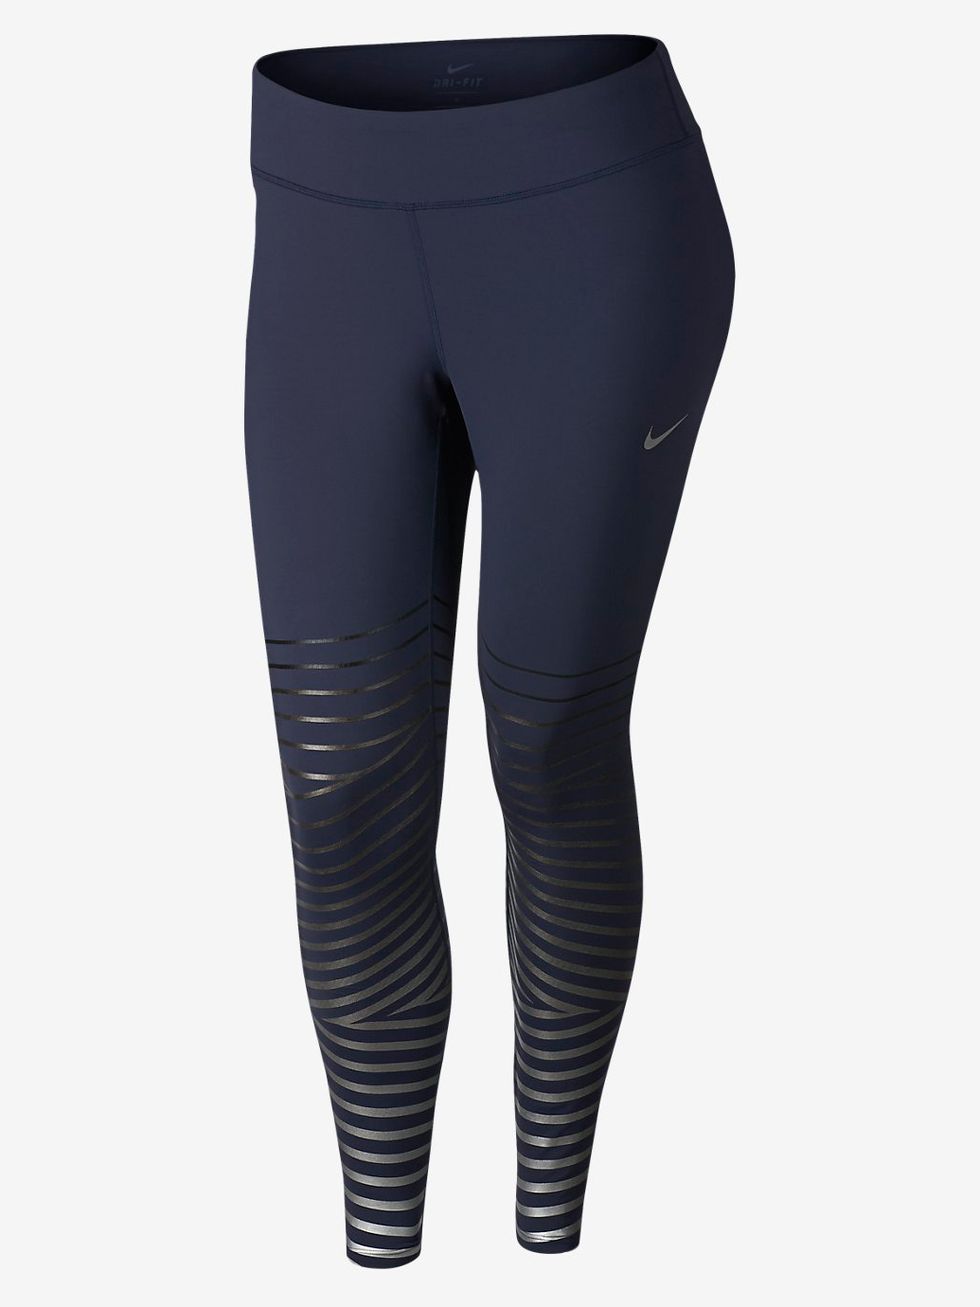 Running Clothes for Women - Cute Winter Running Clothes